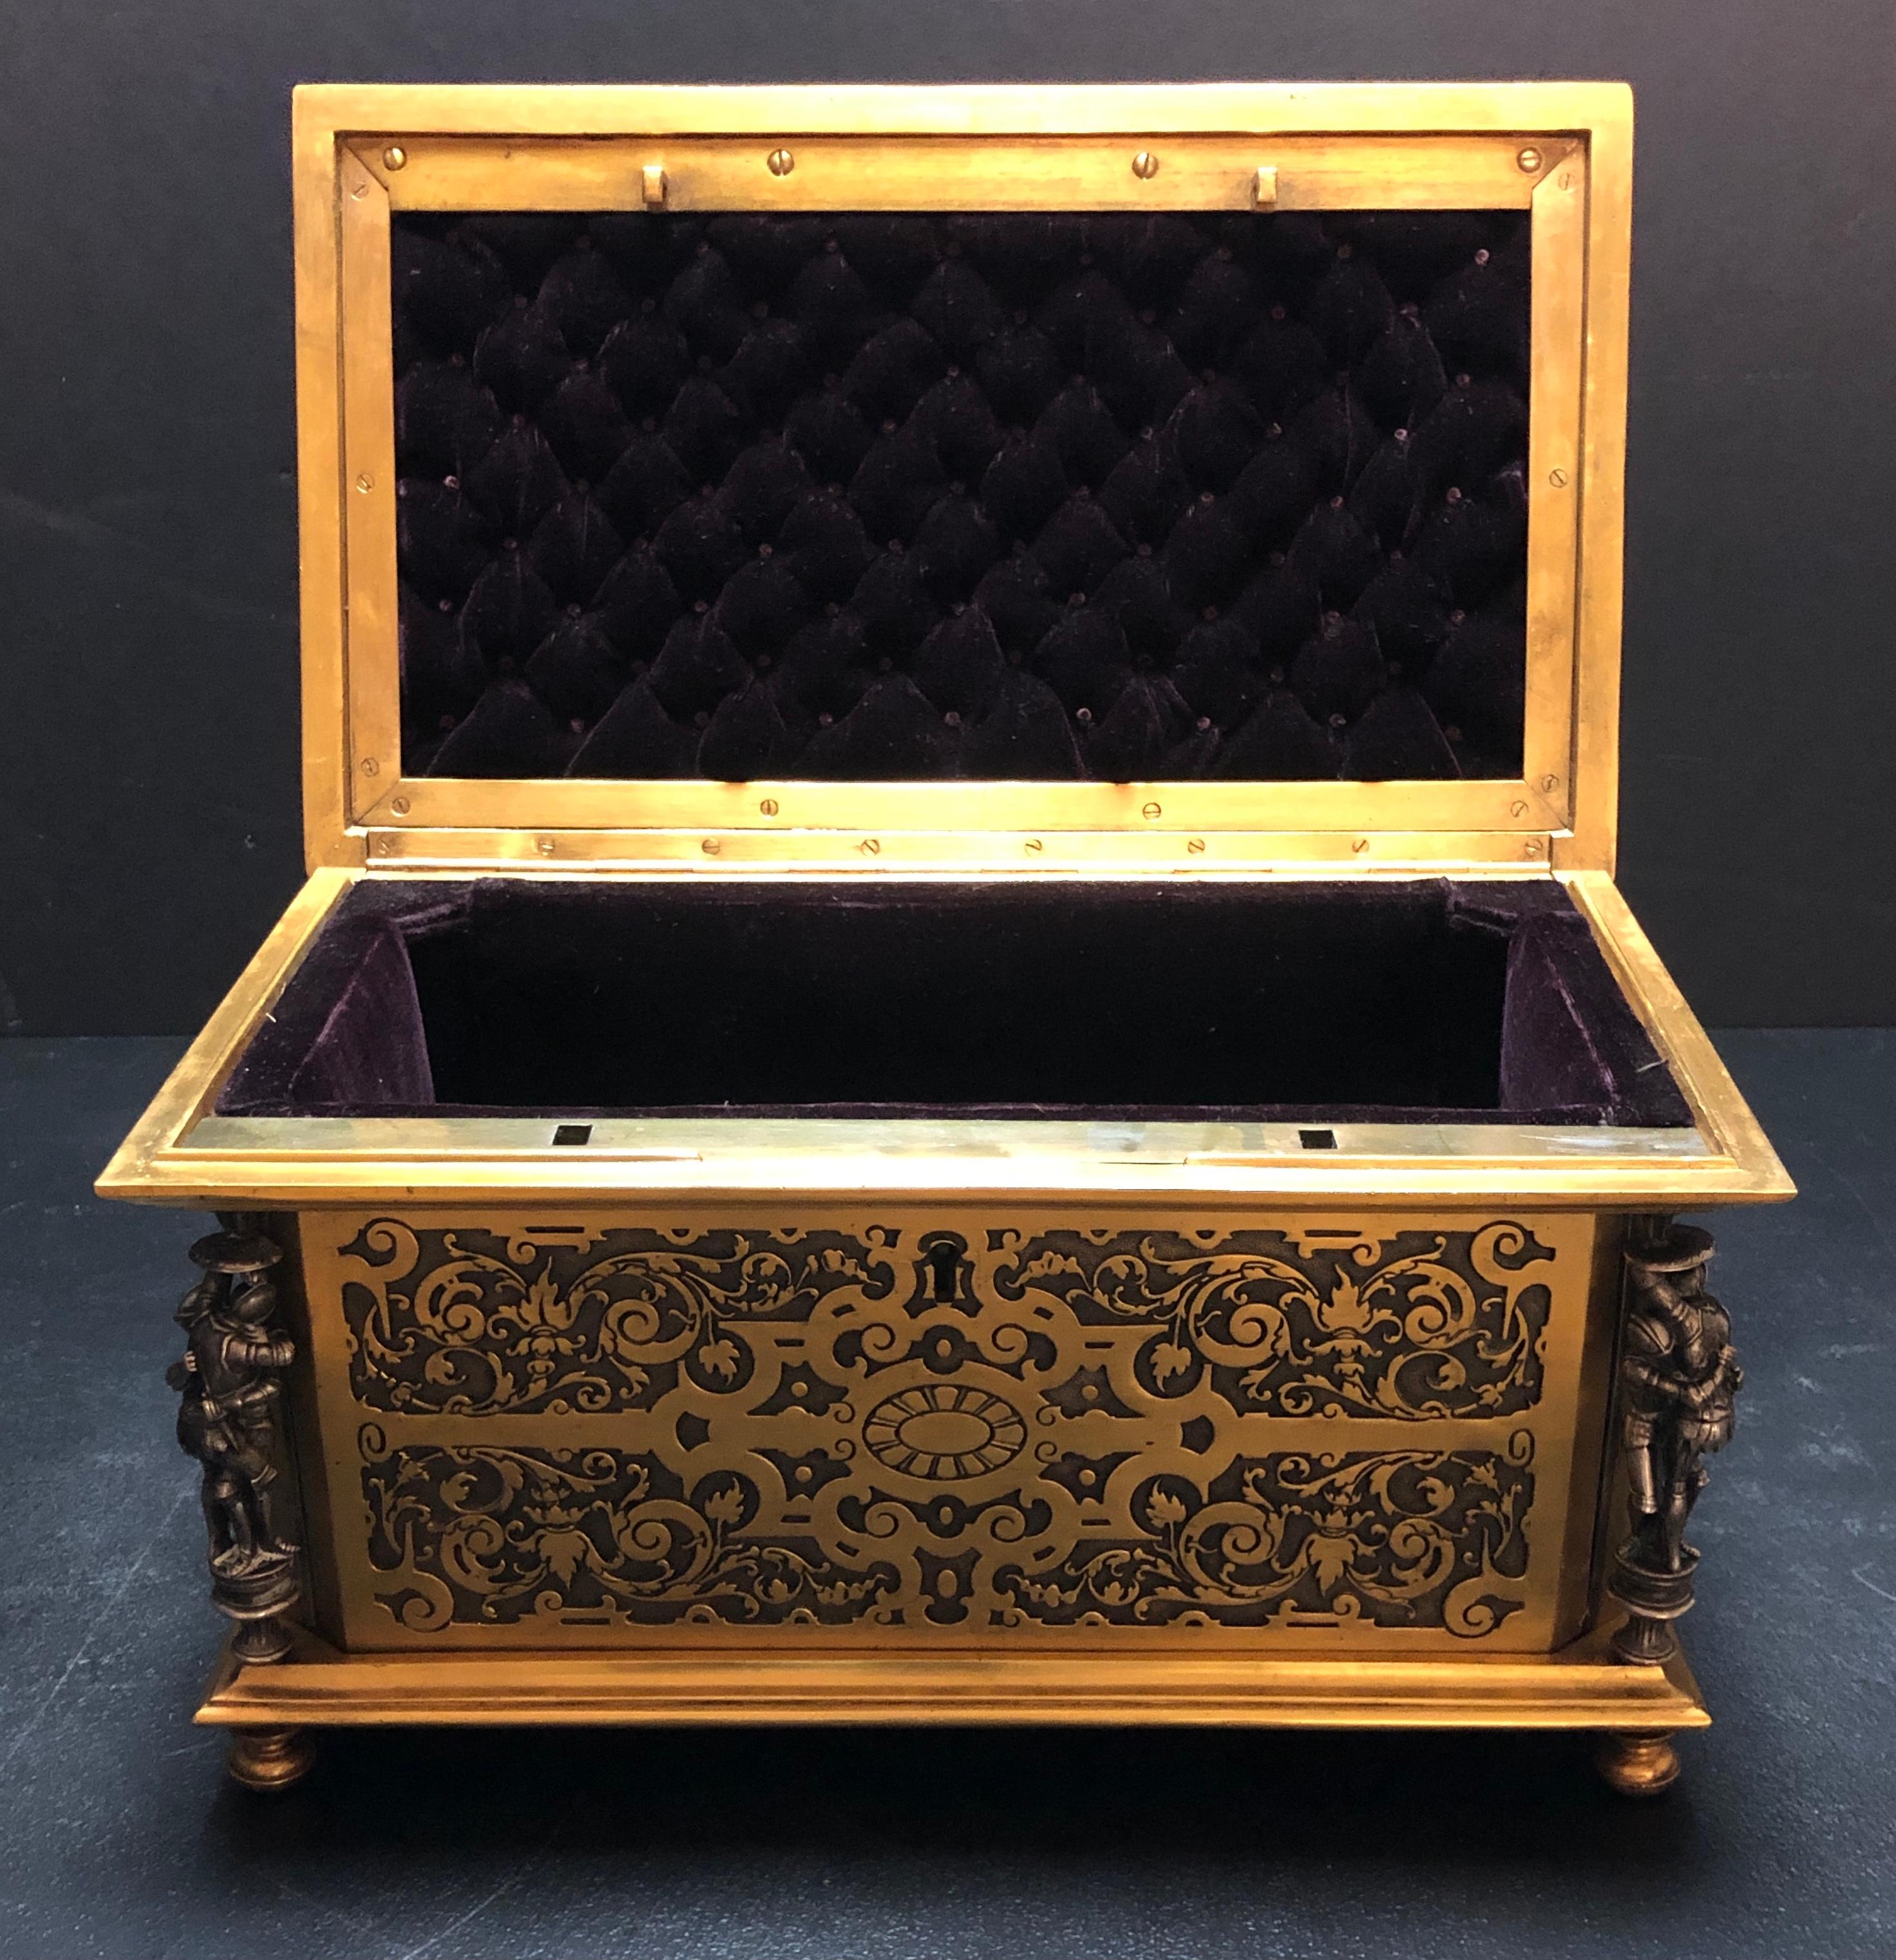 Large Gilt and Silvered Bronze Jewel Box/Casket In Good Condition For Sale In Norwood, NJ